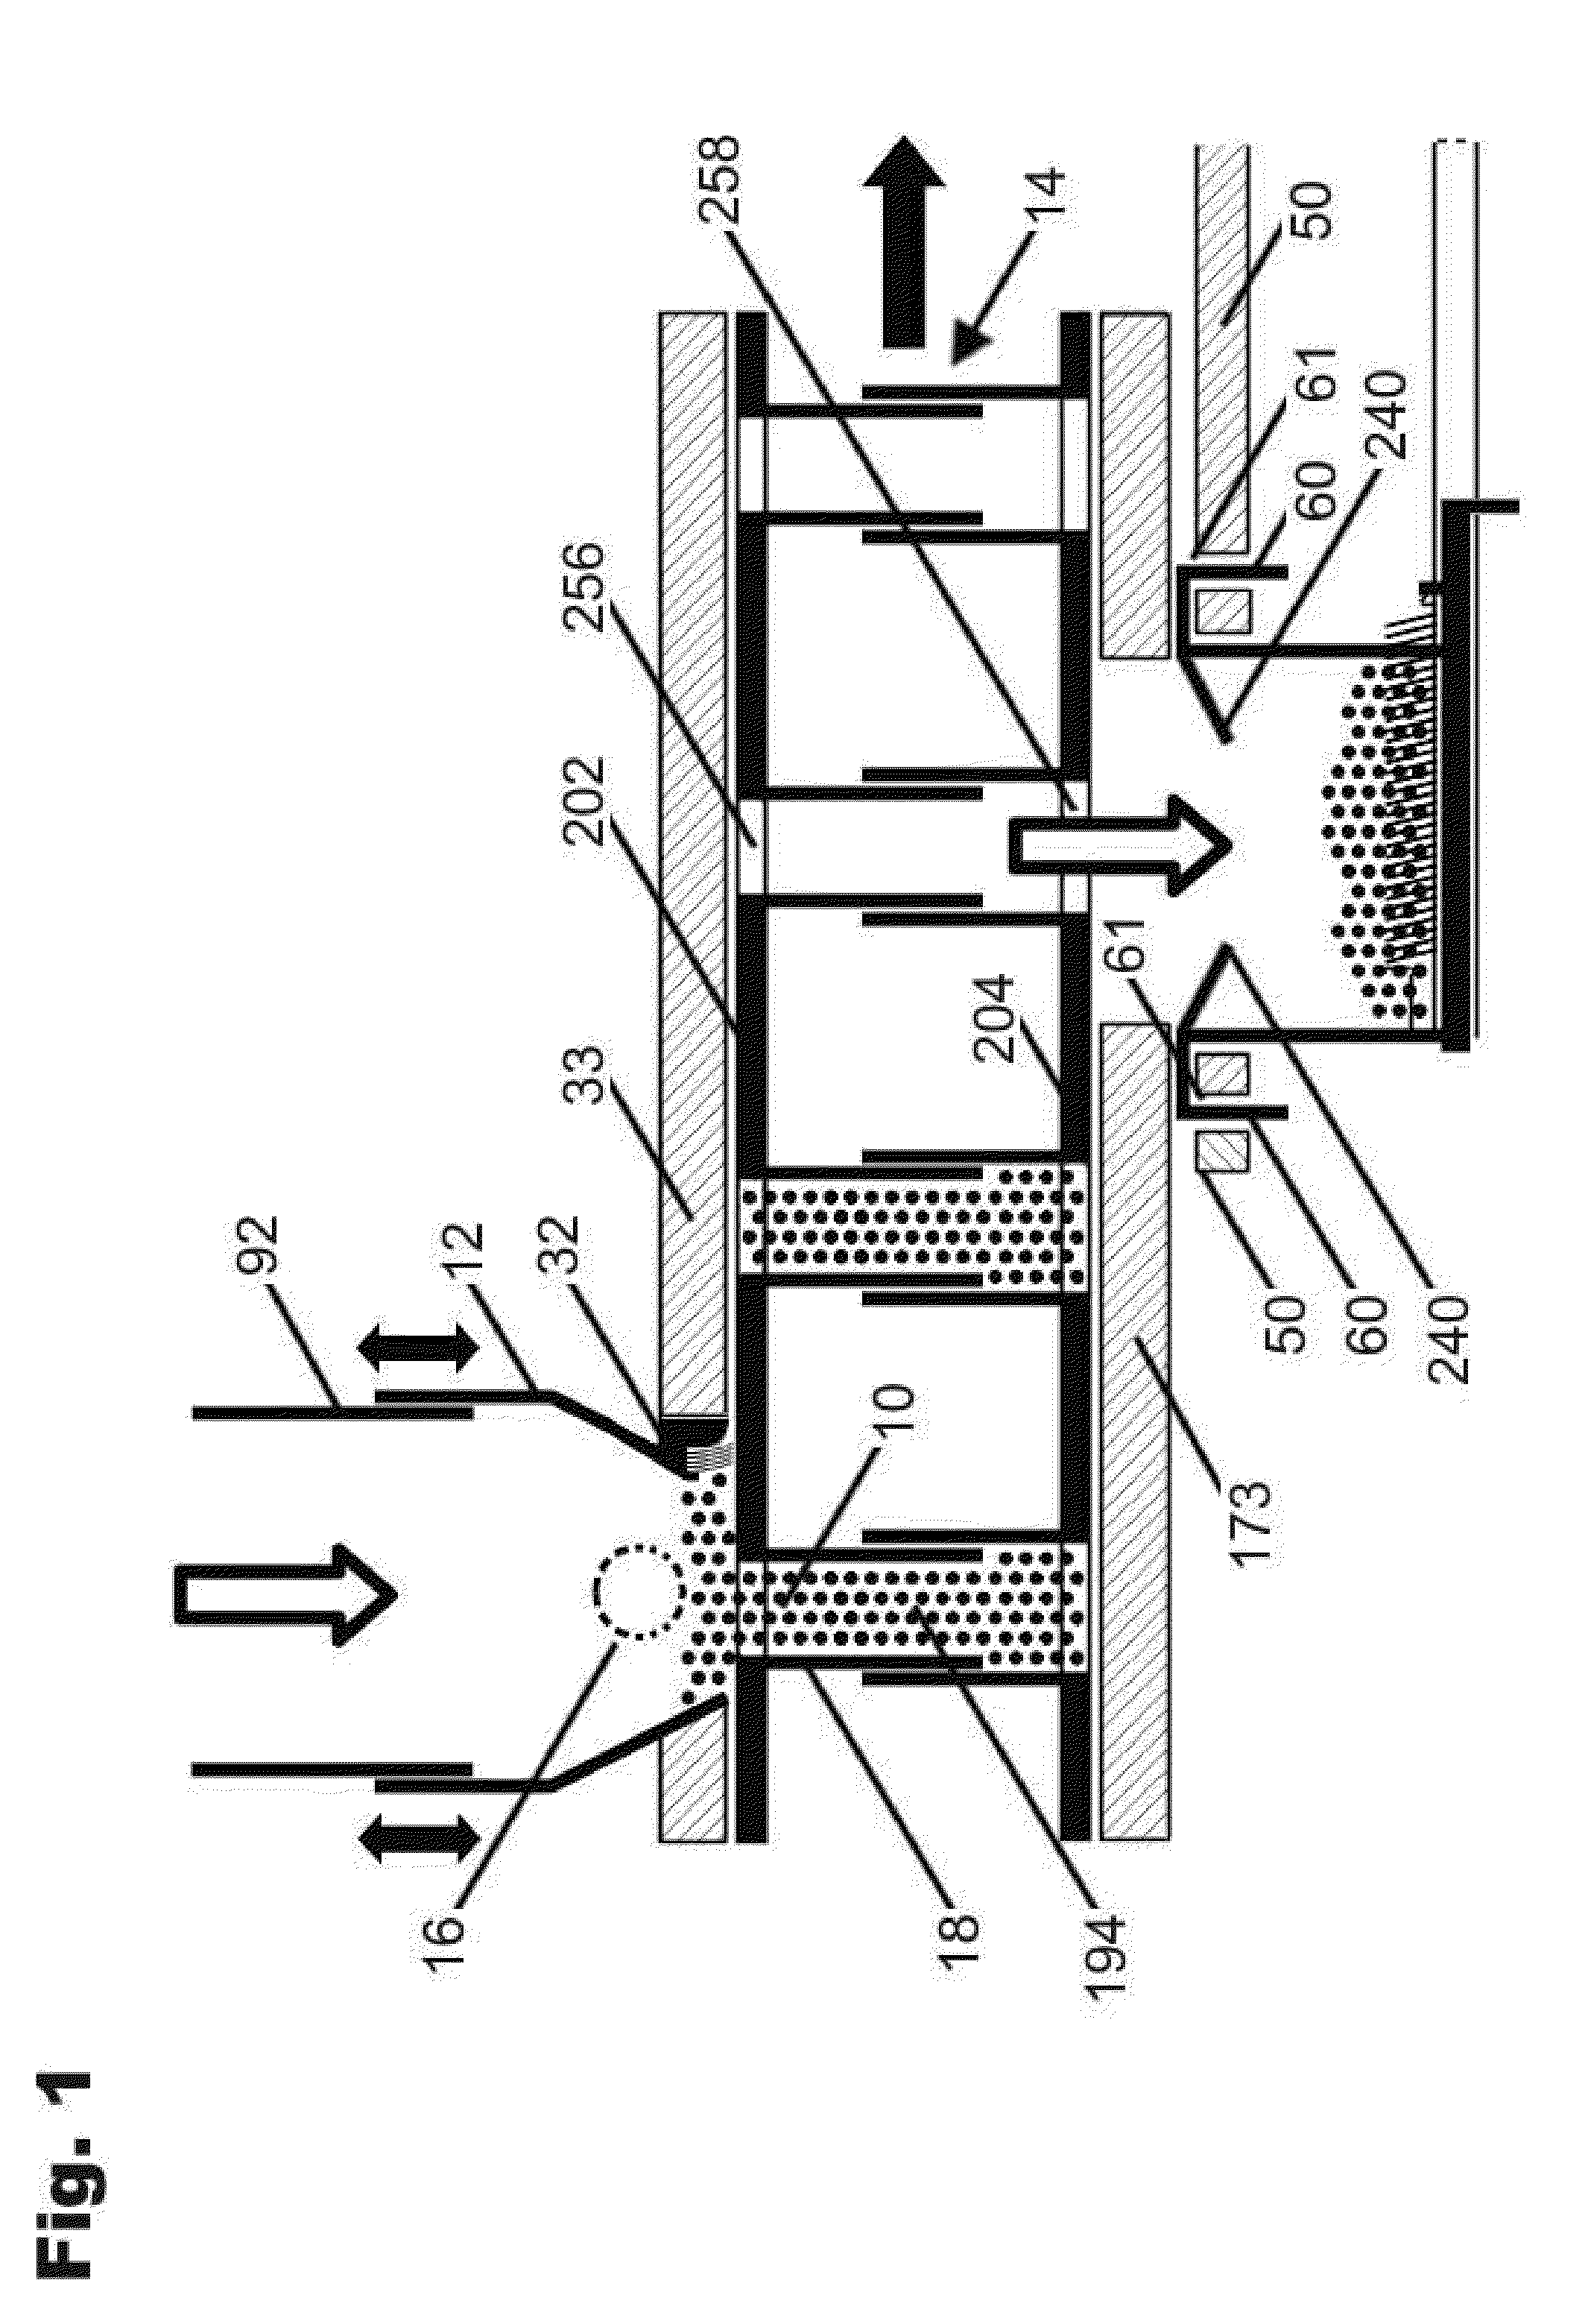 Automatic Apparatus for High Speed Precision Portioning of Granules By Weight